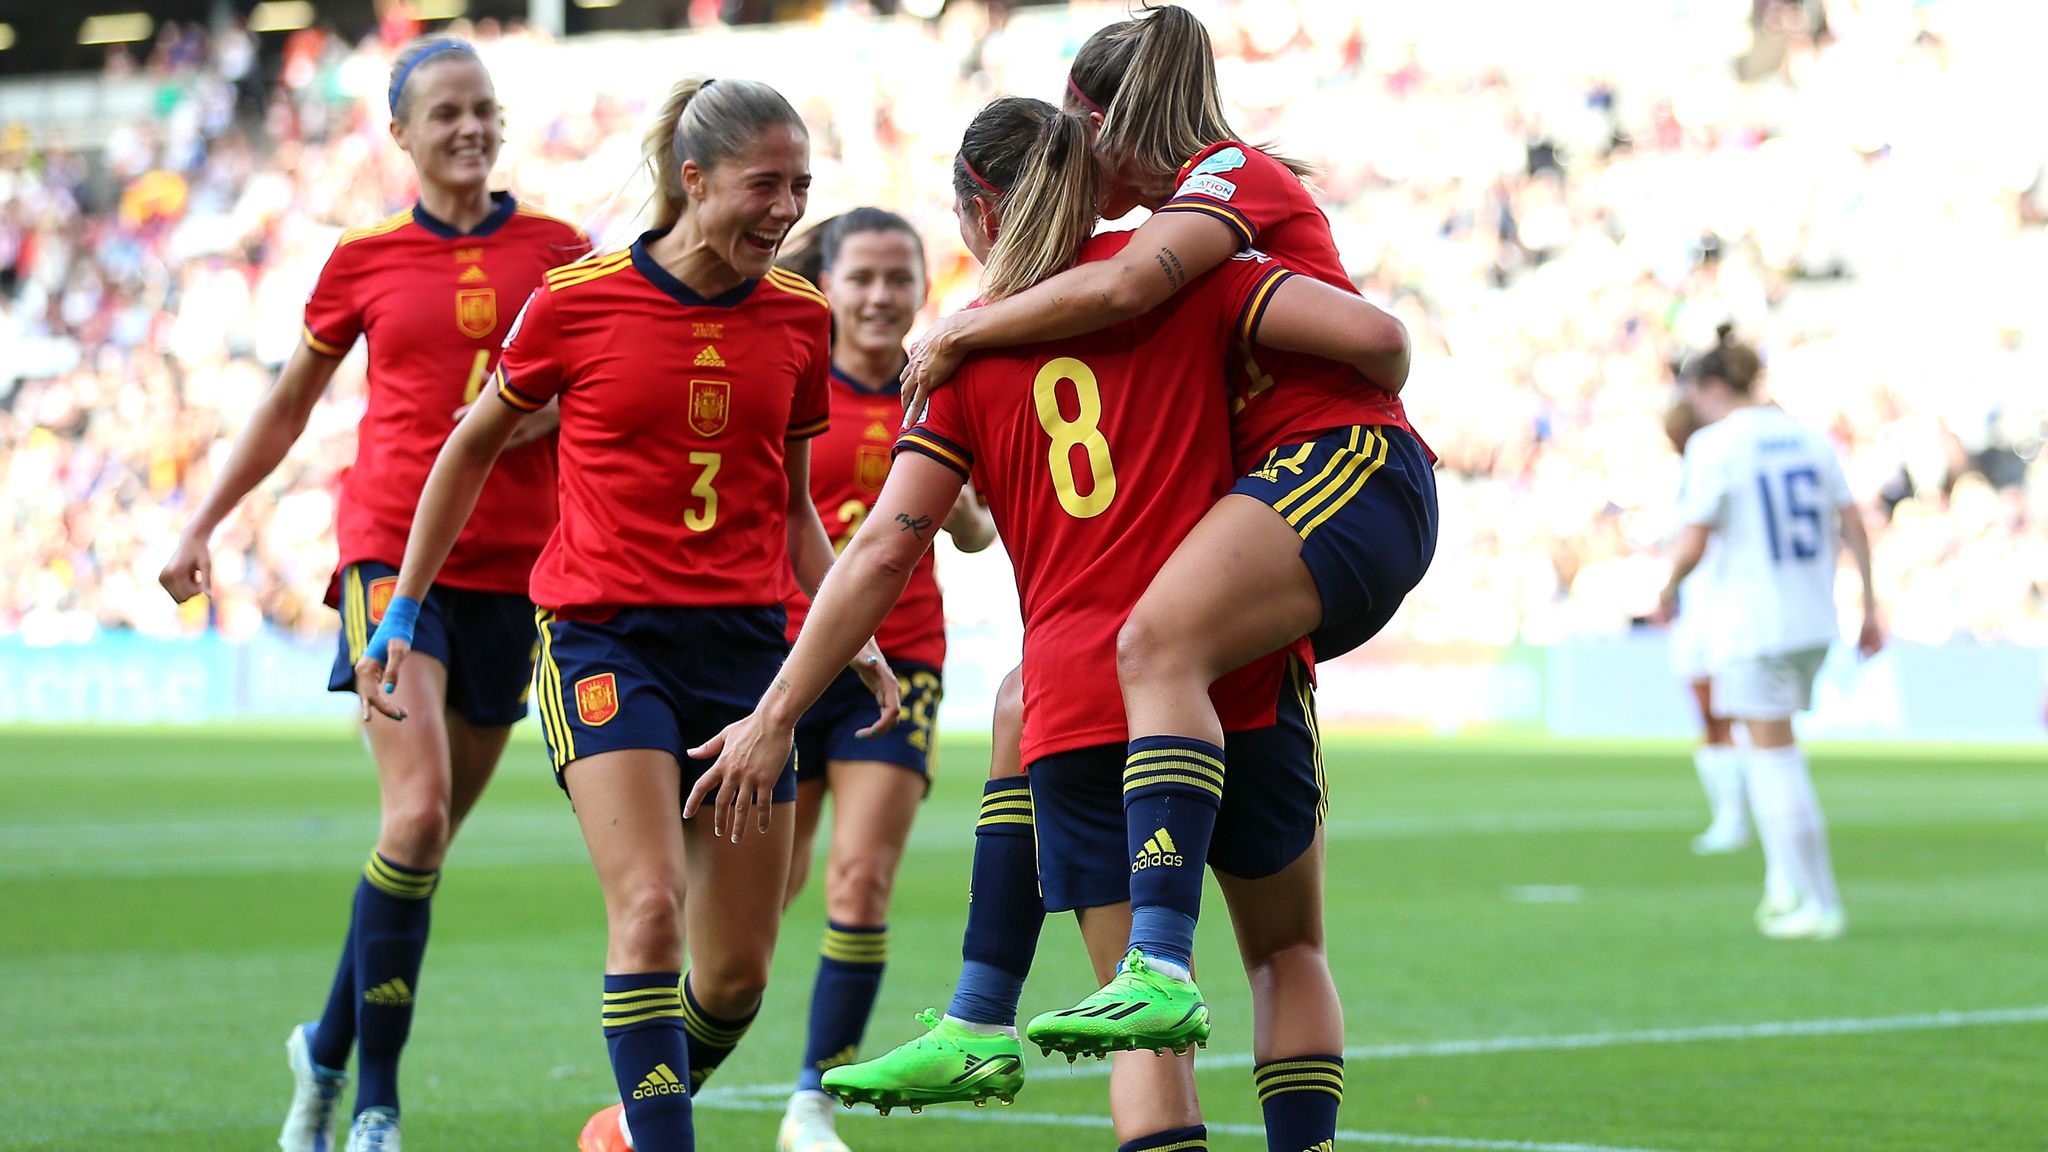 Women's Euros 2022 preview: Germany face Spain in potential Group B decider while Denmark play Finland